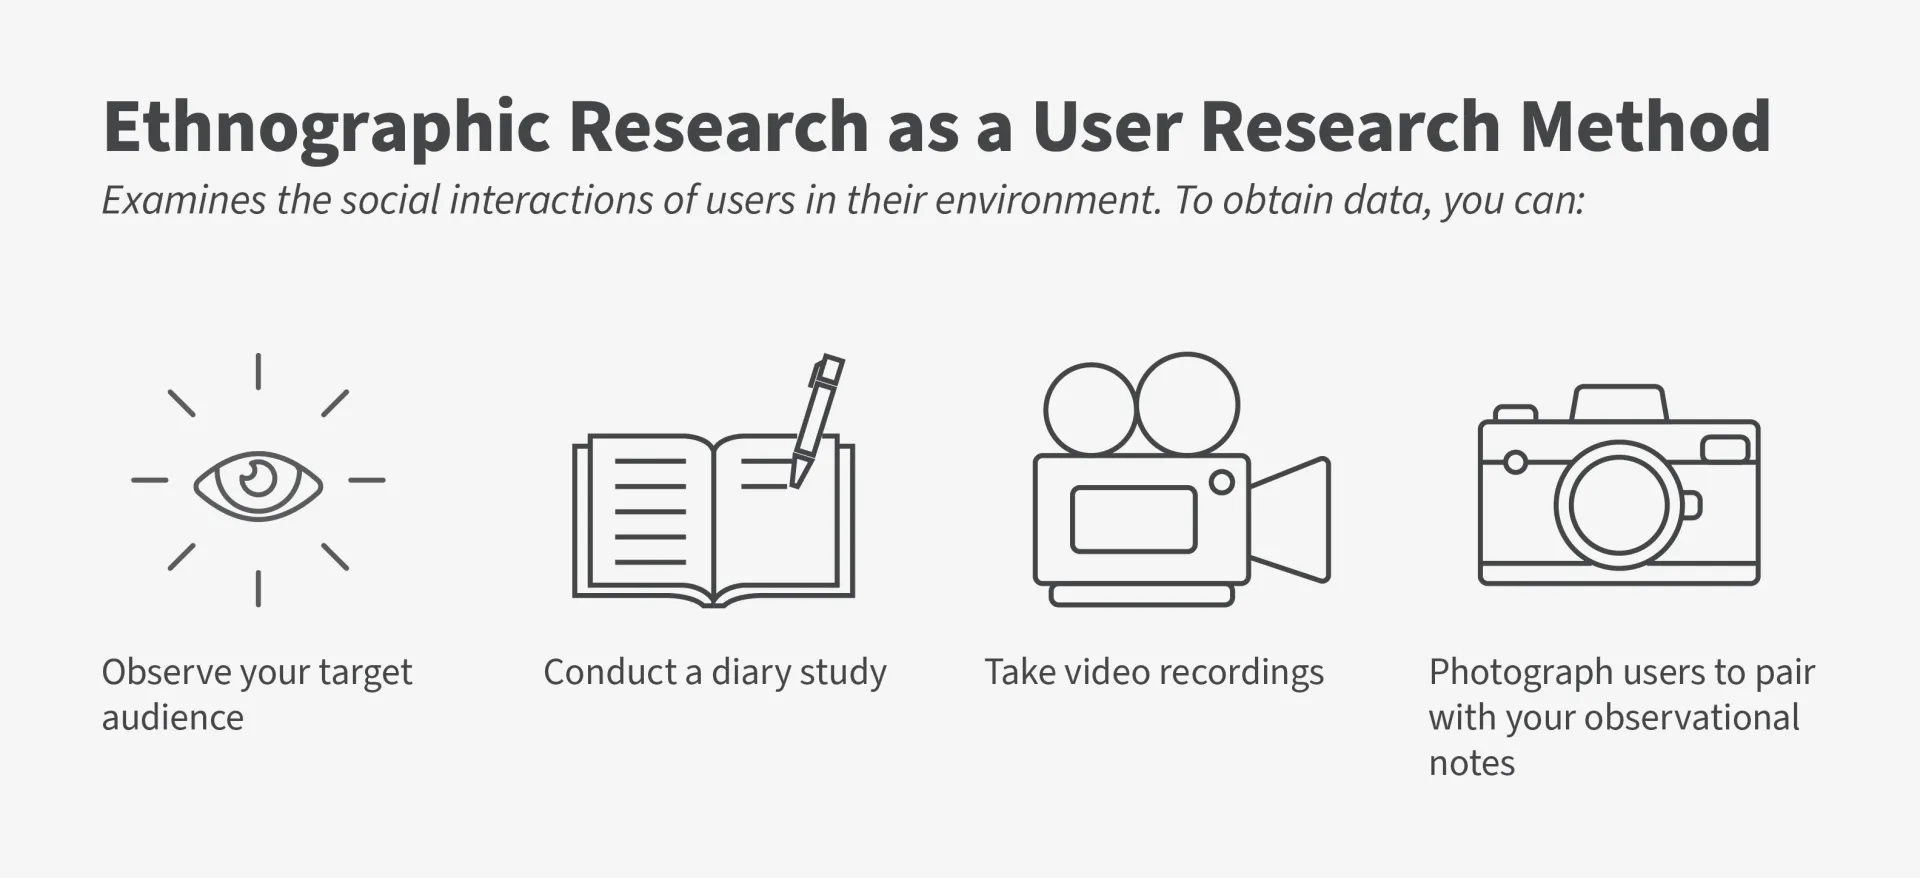 Infographic with four icons showing the different ways to obtain data when conducting ethnographic research.  